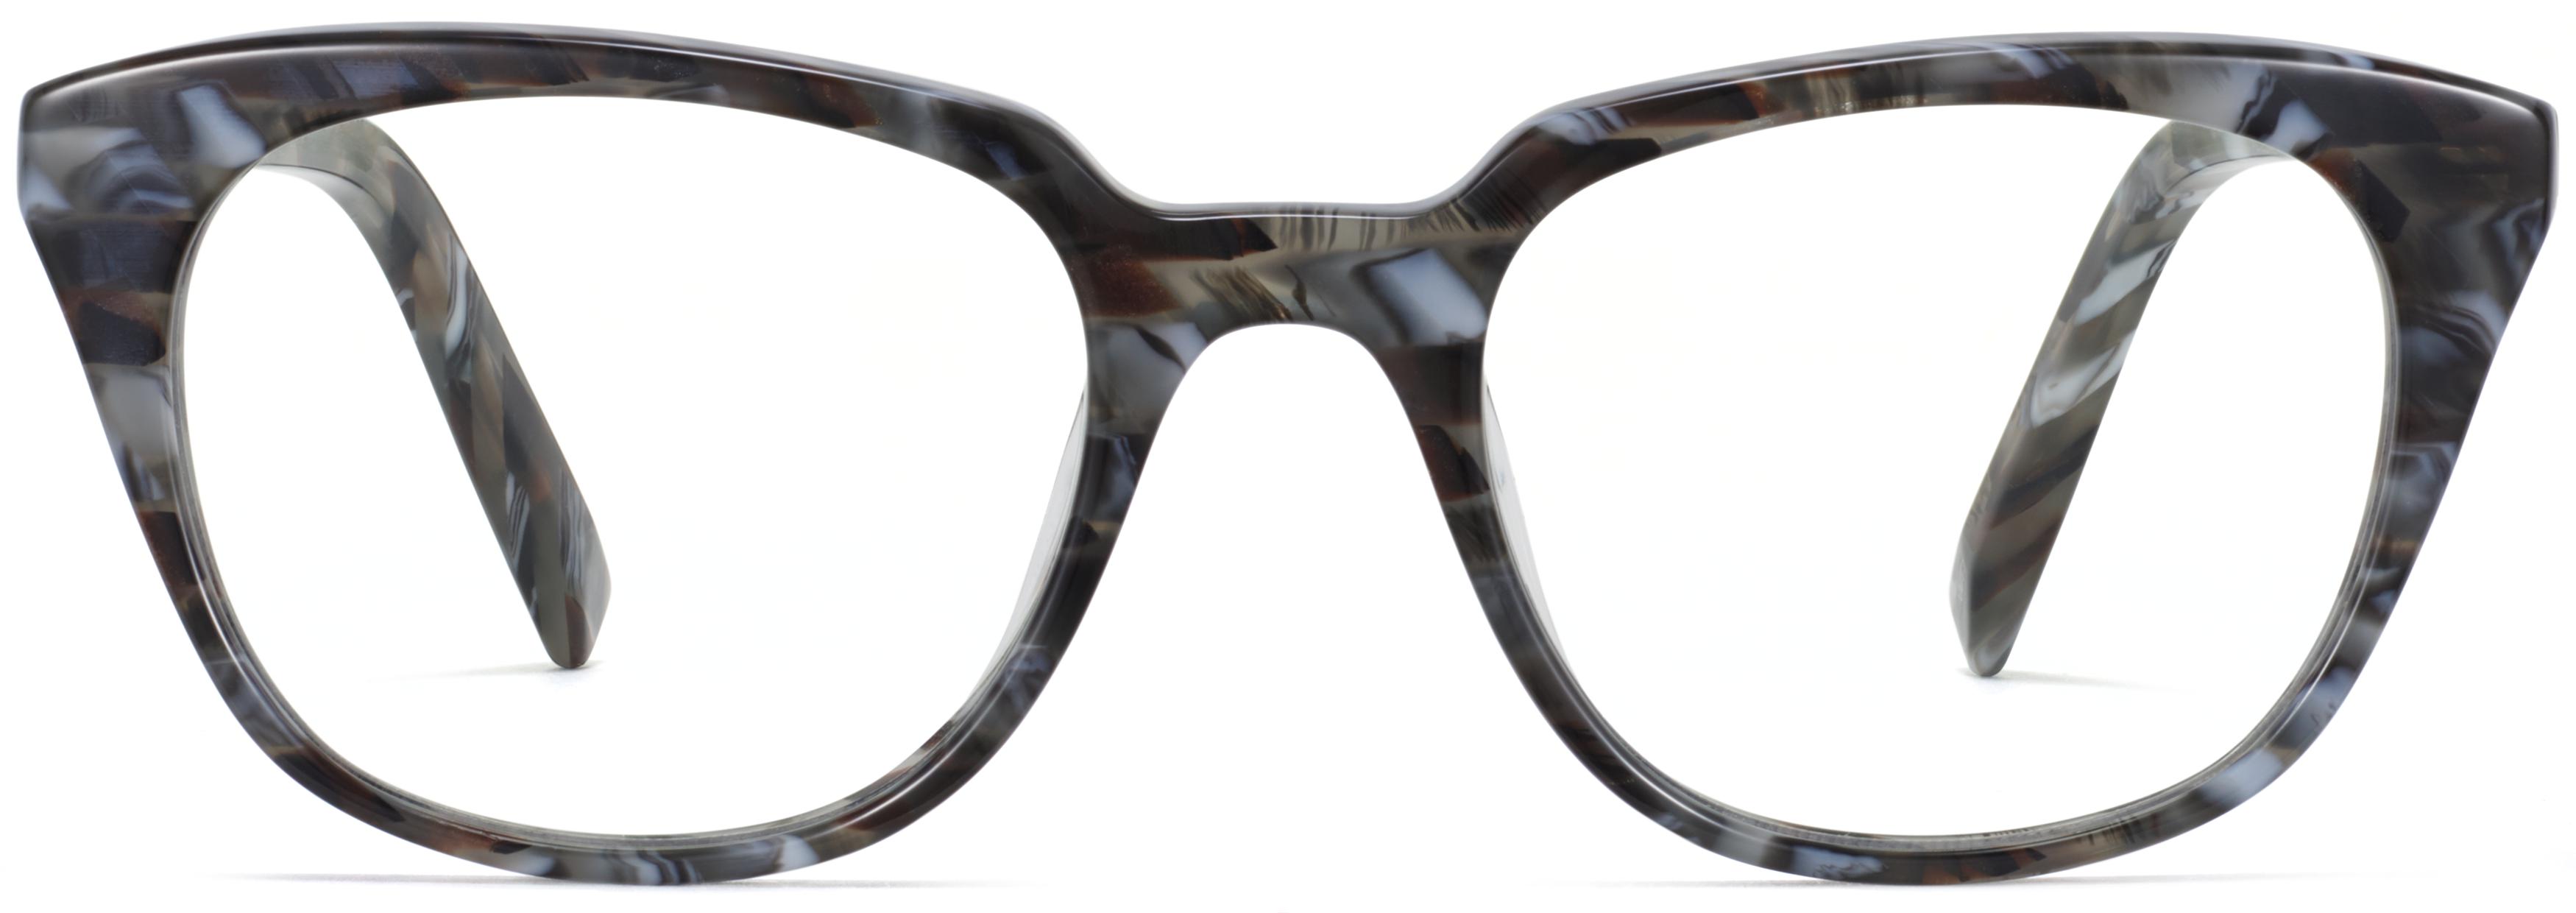 Chelsea Eyeglasses in Striped Marble | Warby Parker